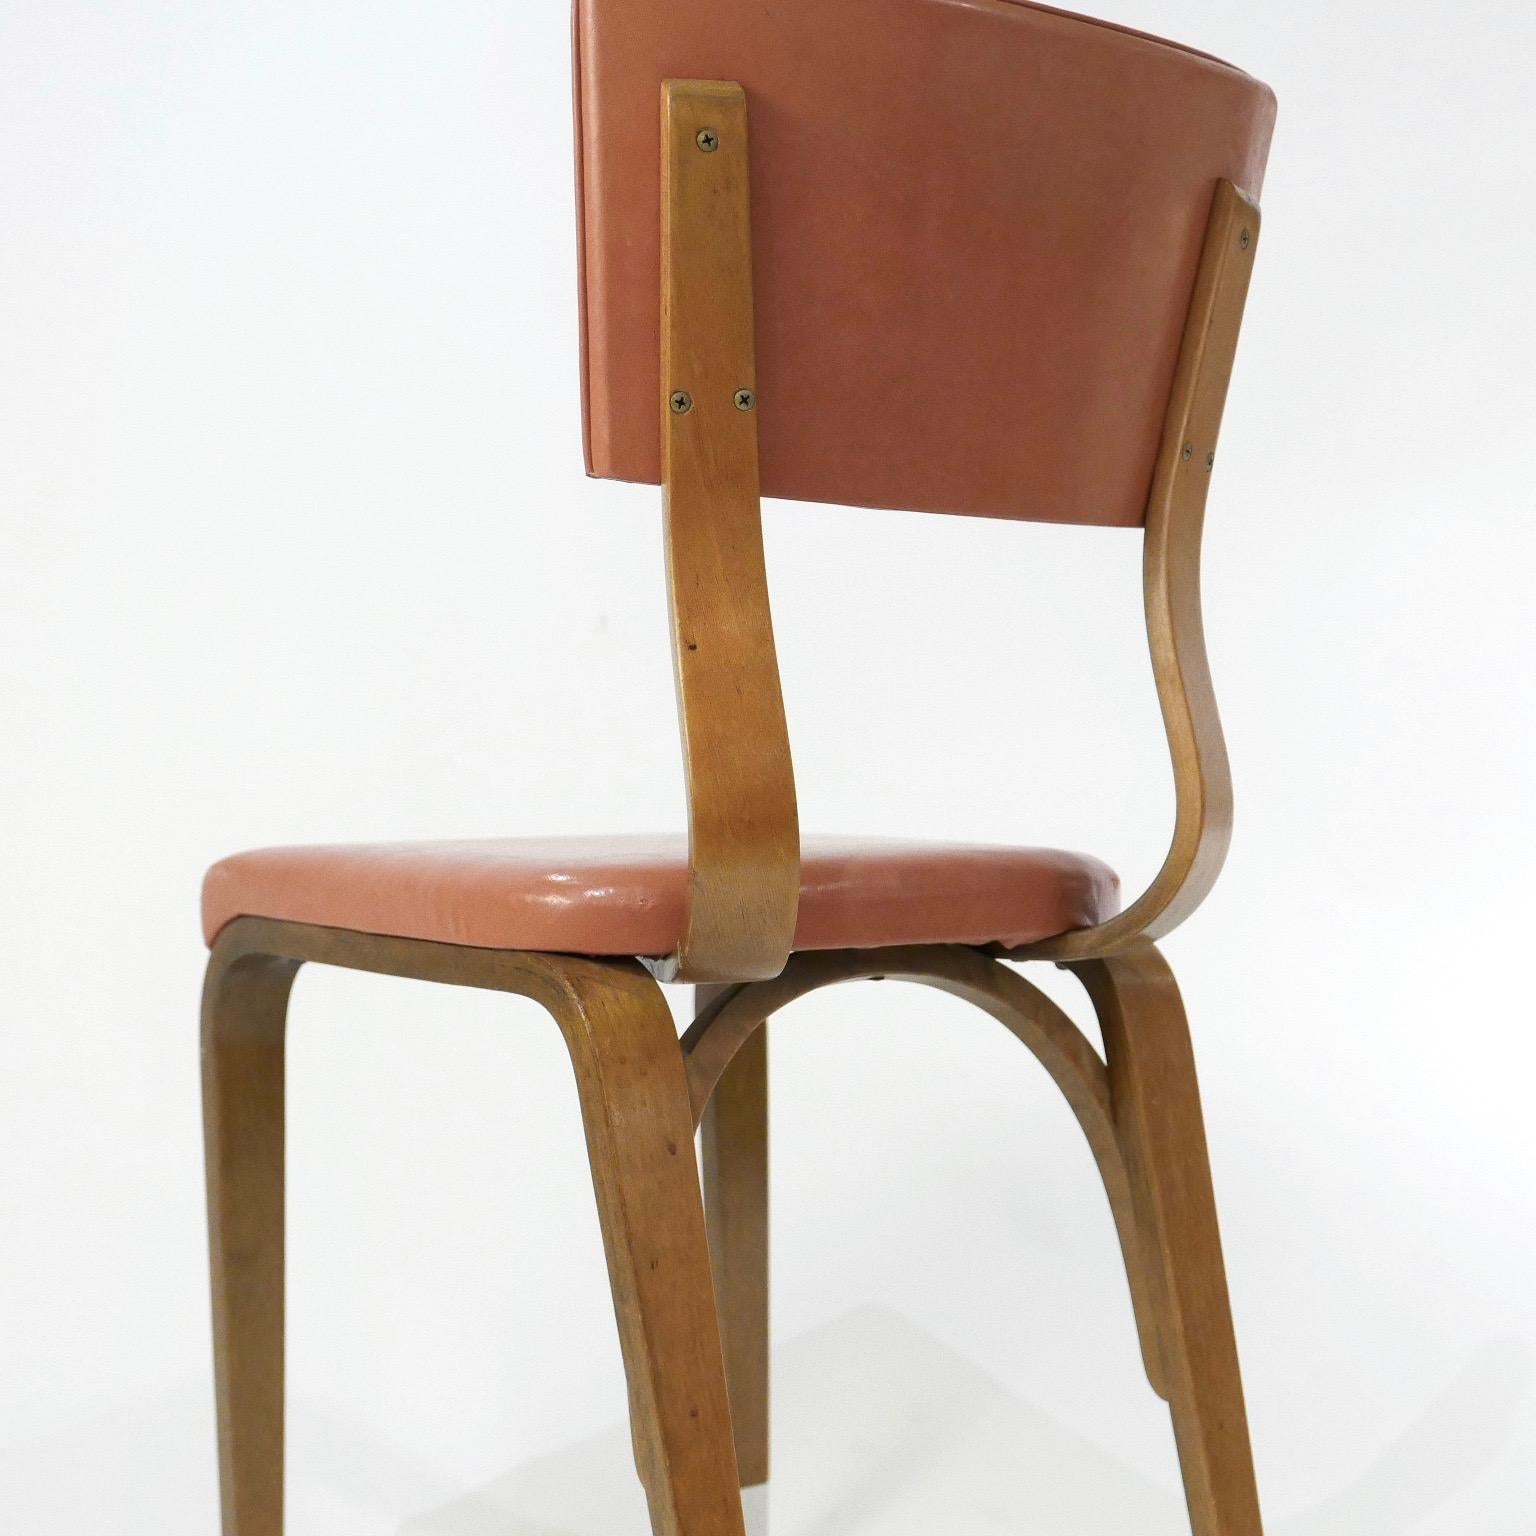 Set of 6 1950s Thonet Padded Bentwood Bent Plywood Dining, Cafe, or Desk Chairs  (20. Jahrhundert)